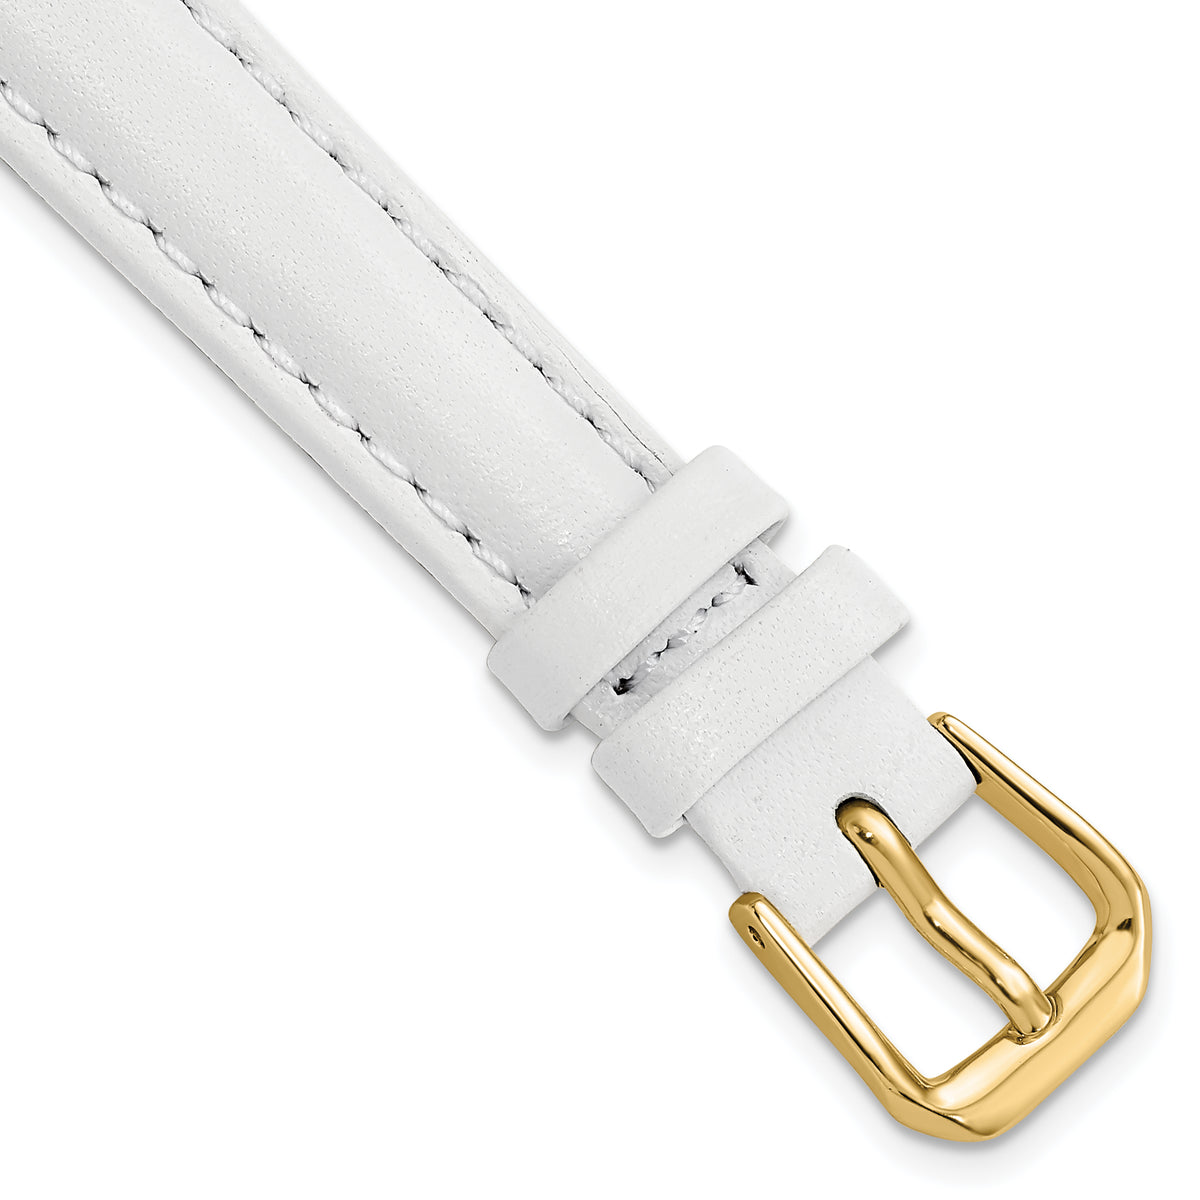 DeBeer 12mm White Smooth Leather with Gold-tone Buckle 6.75 inch Watch Band